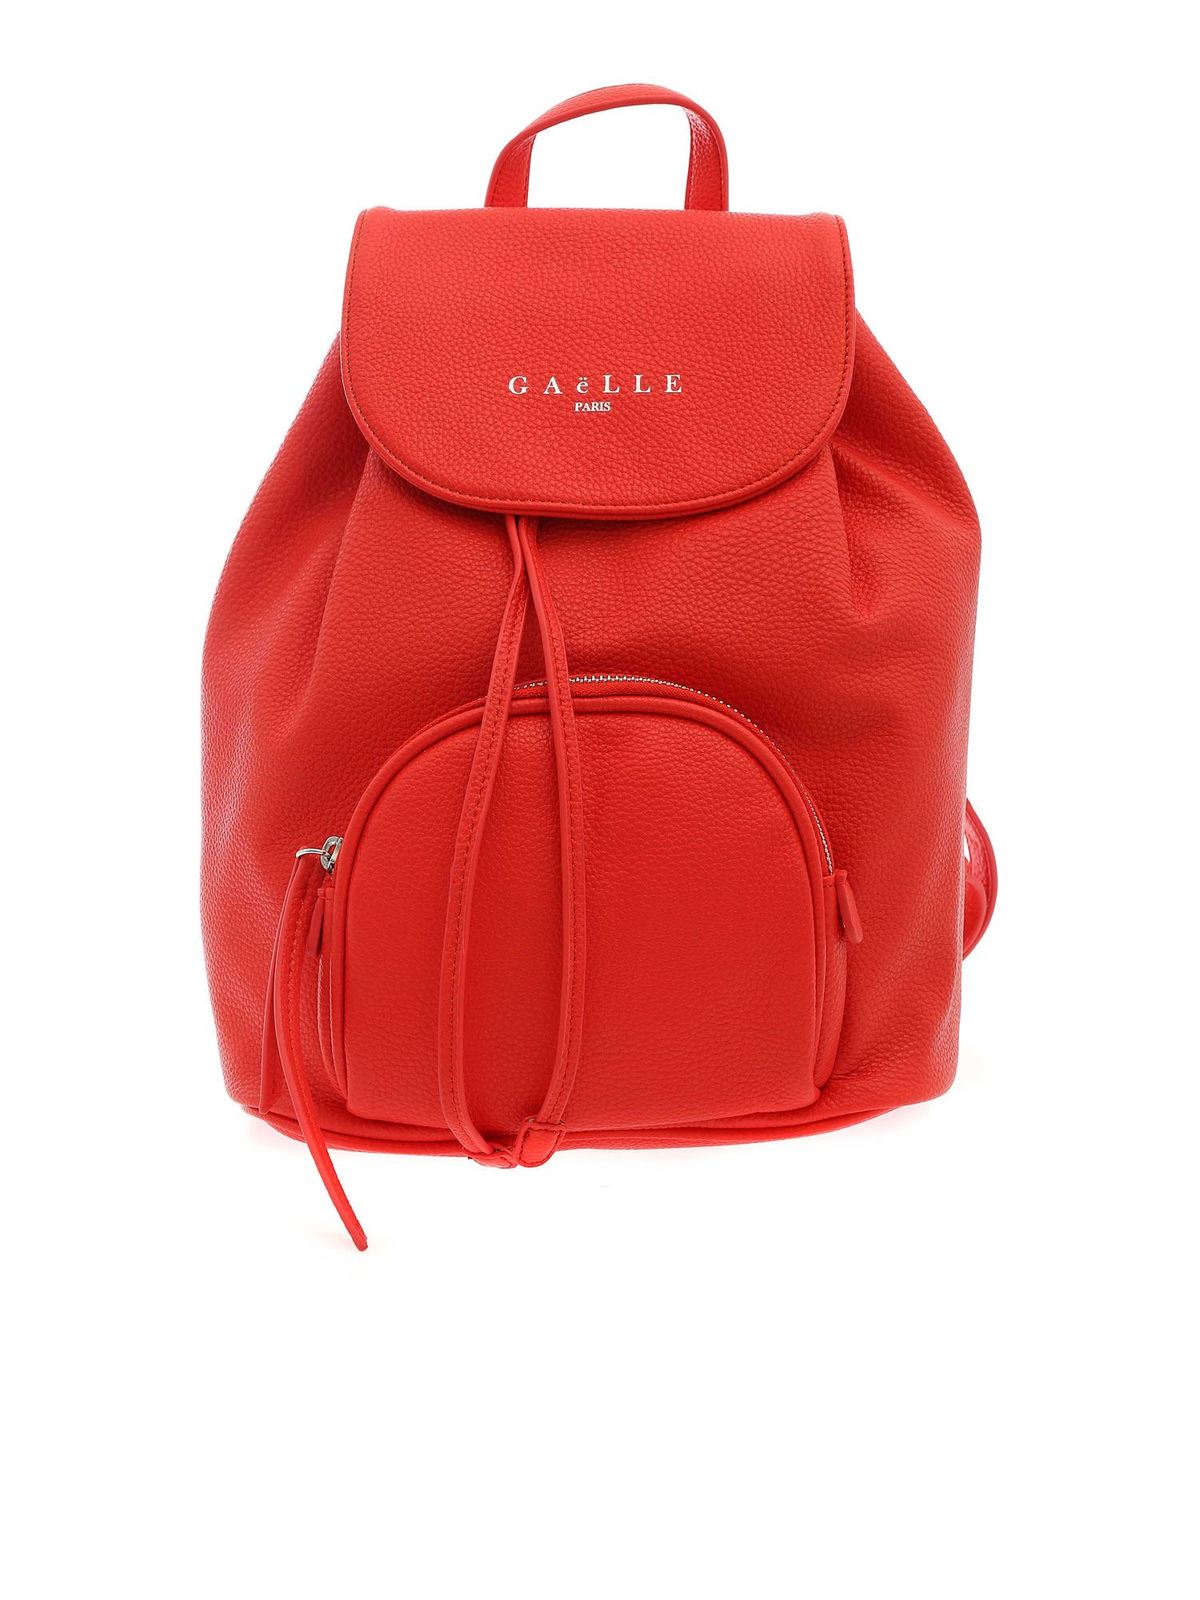 GAELLE PARIS SYNTHETIC LEATHER BACKPACK IN CORAL RED